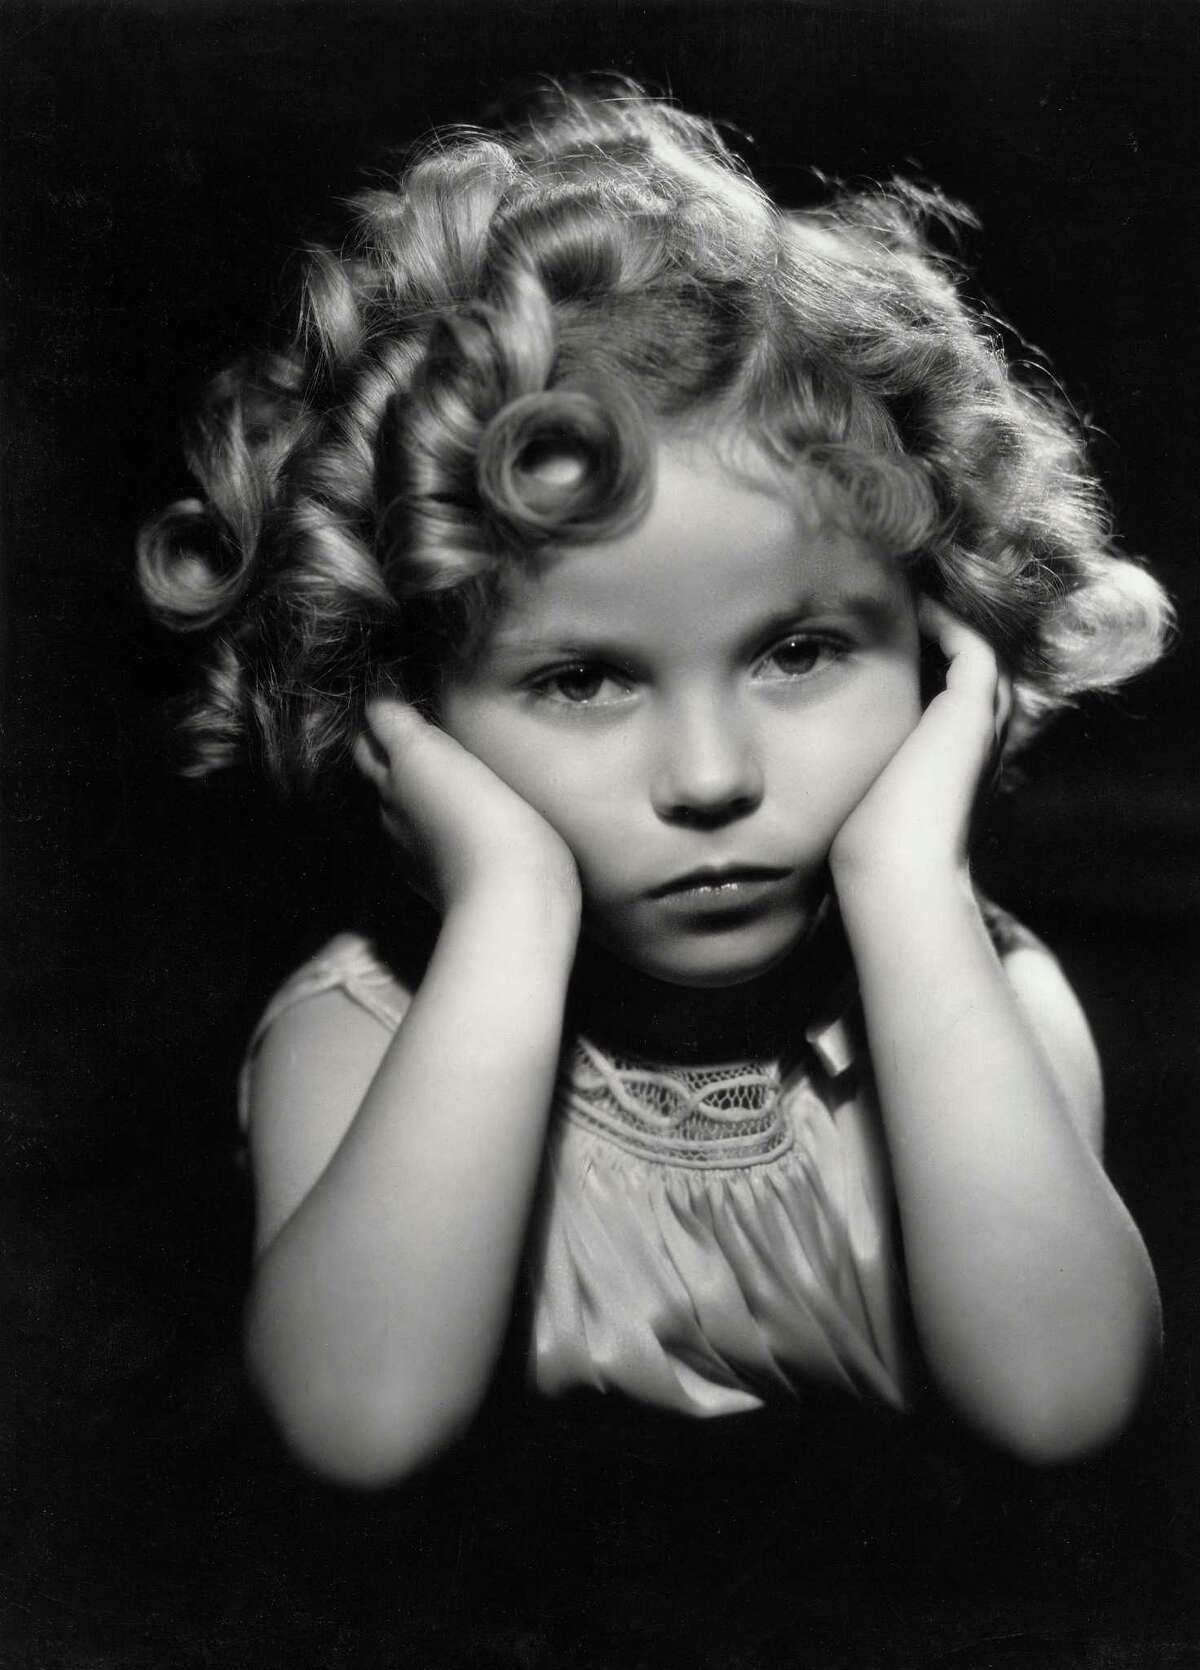 1933: Child actress Shirley Temple in one of her famous poses.